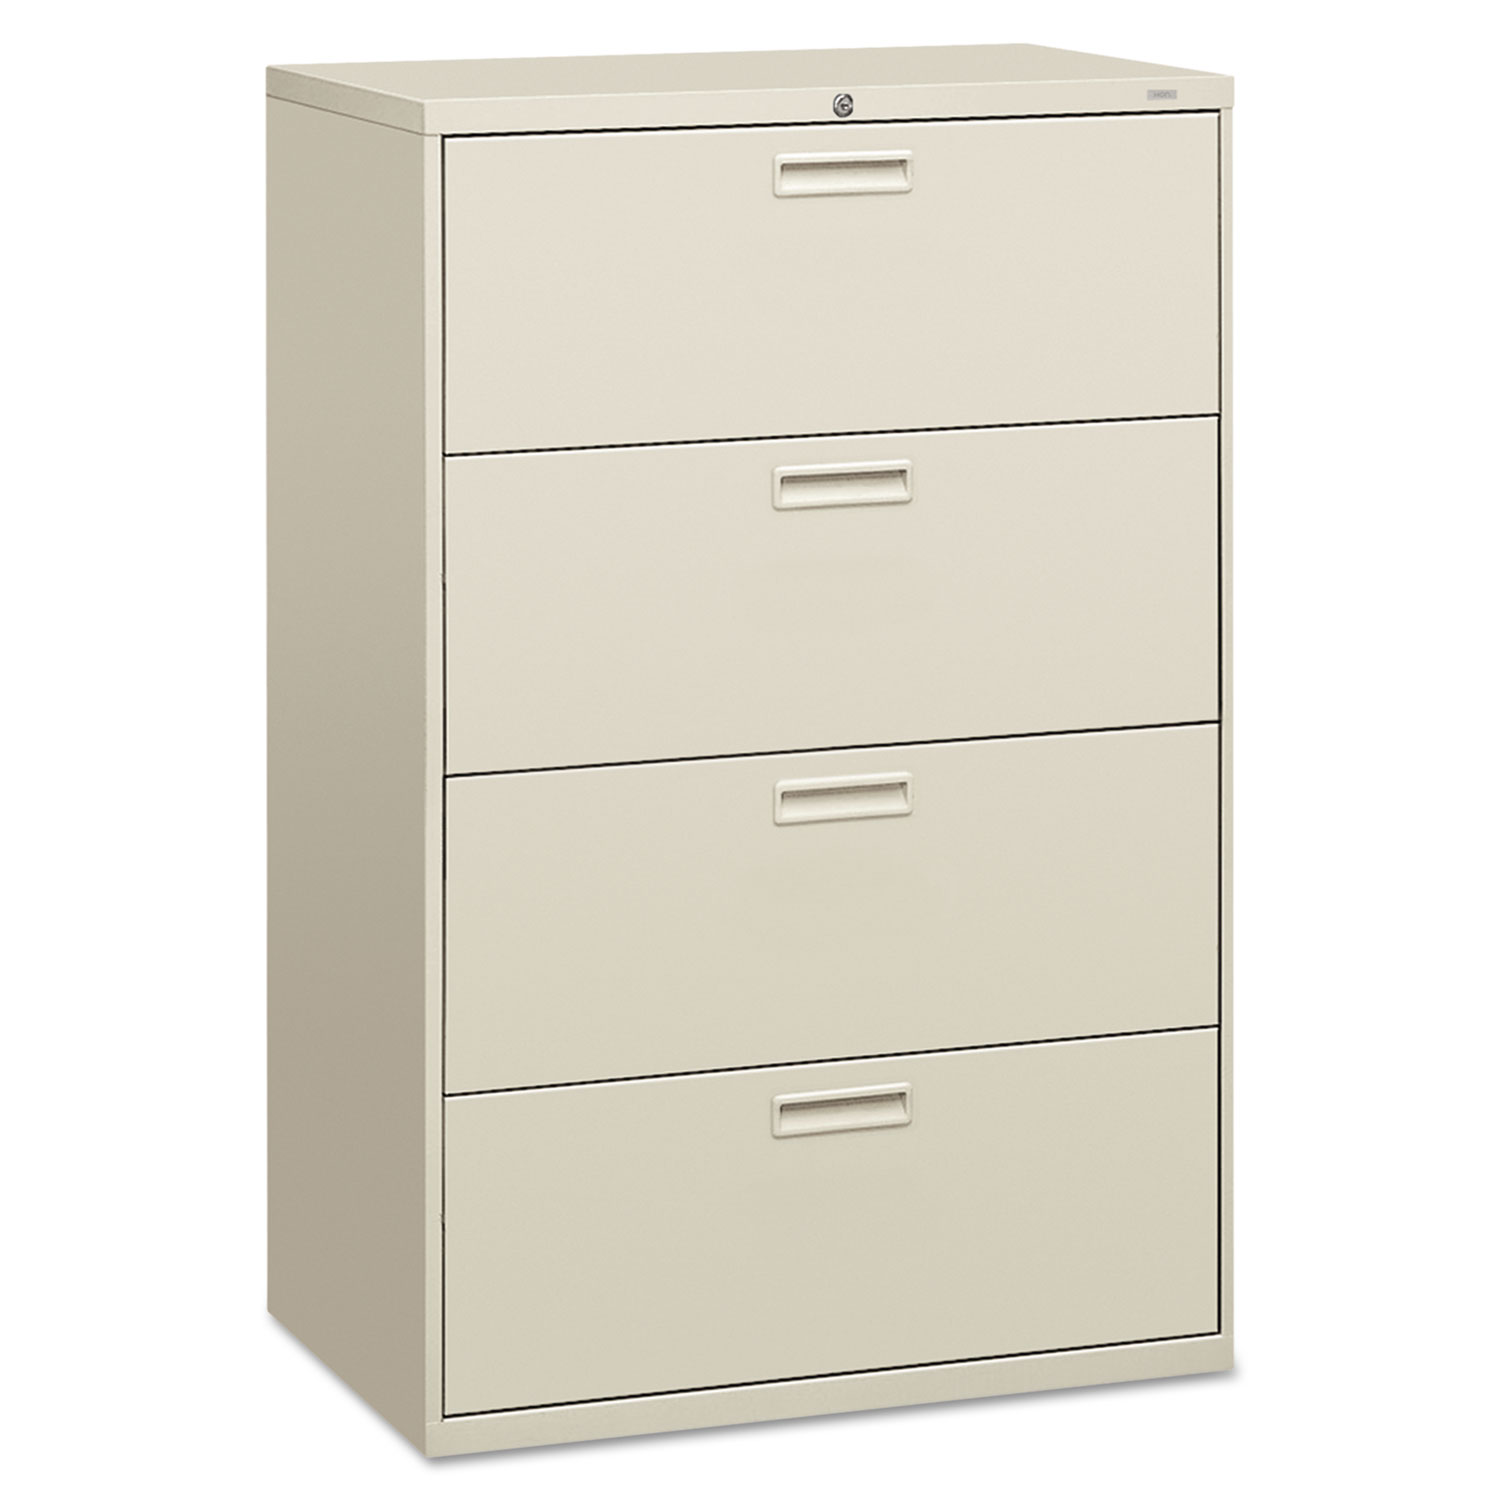 500 Series Four-Drawer Lateral File, 36w x 18d x 52-1/2h, Light Gray